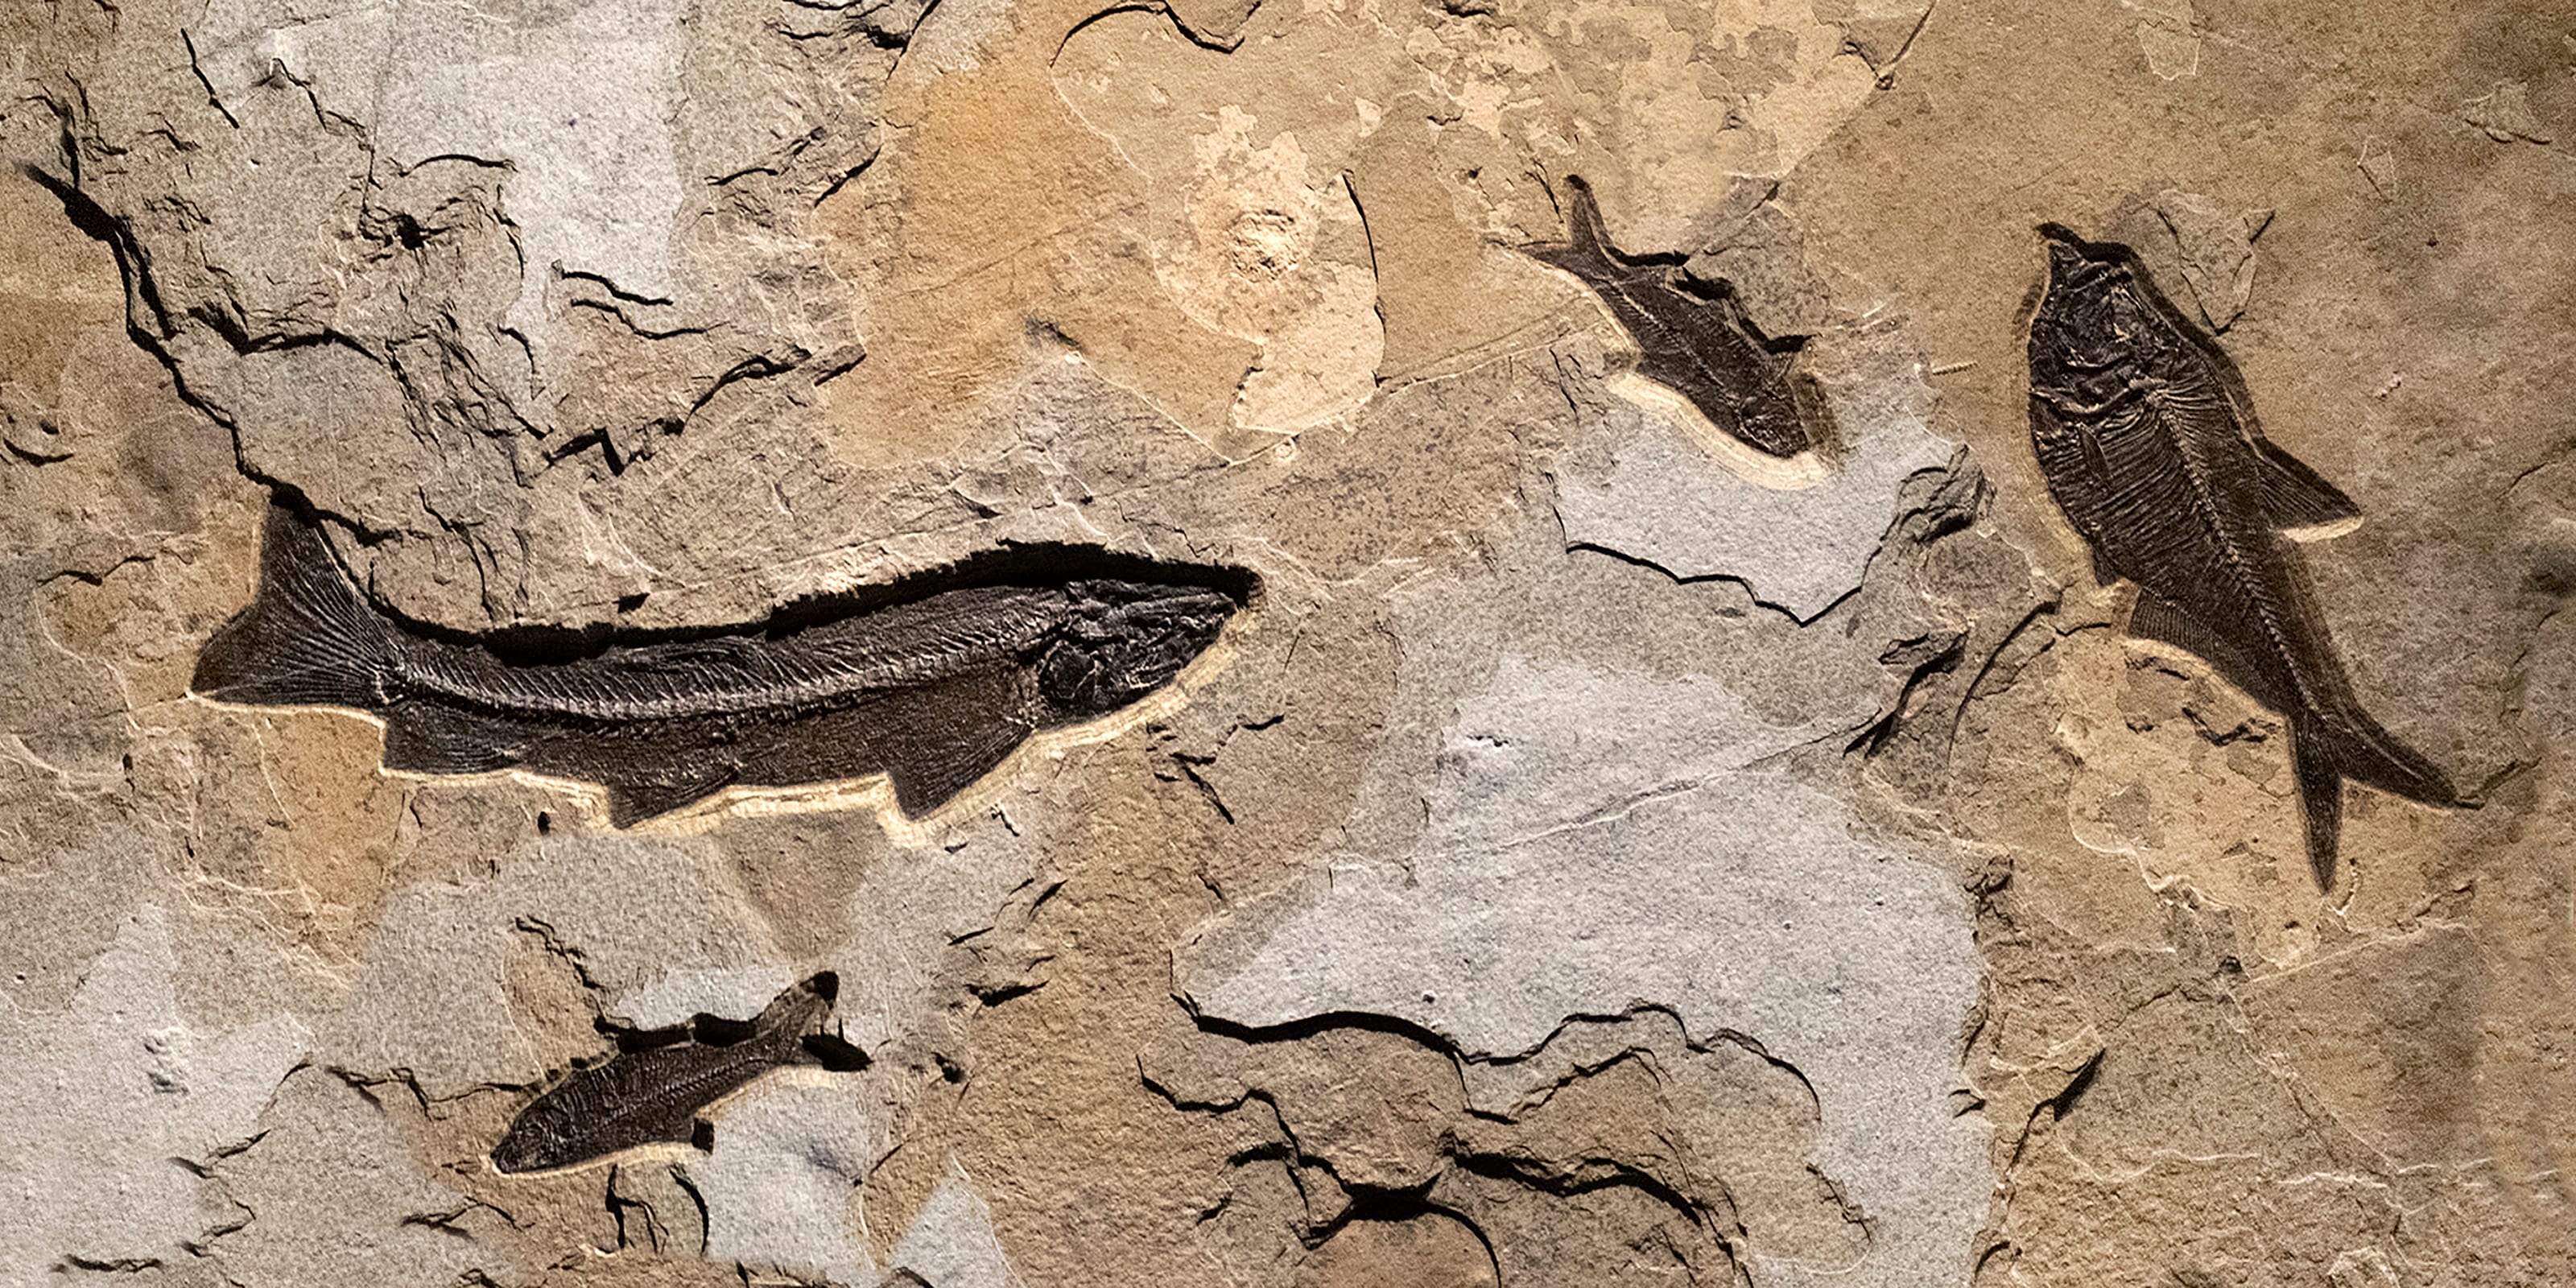 Detail of a Fossil FIsh Mural